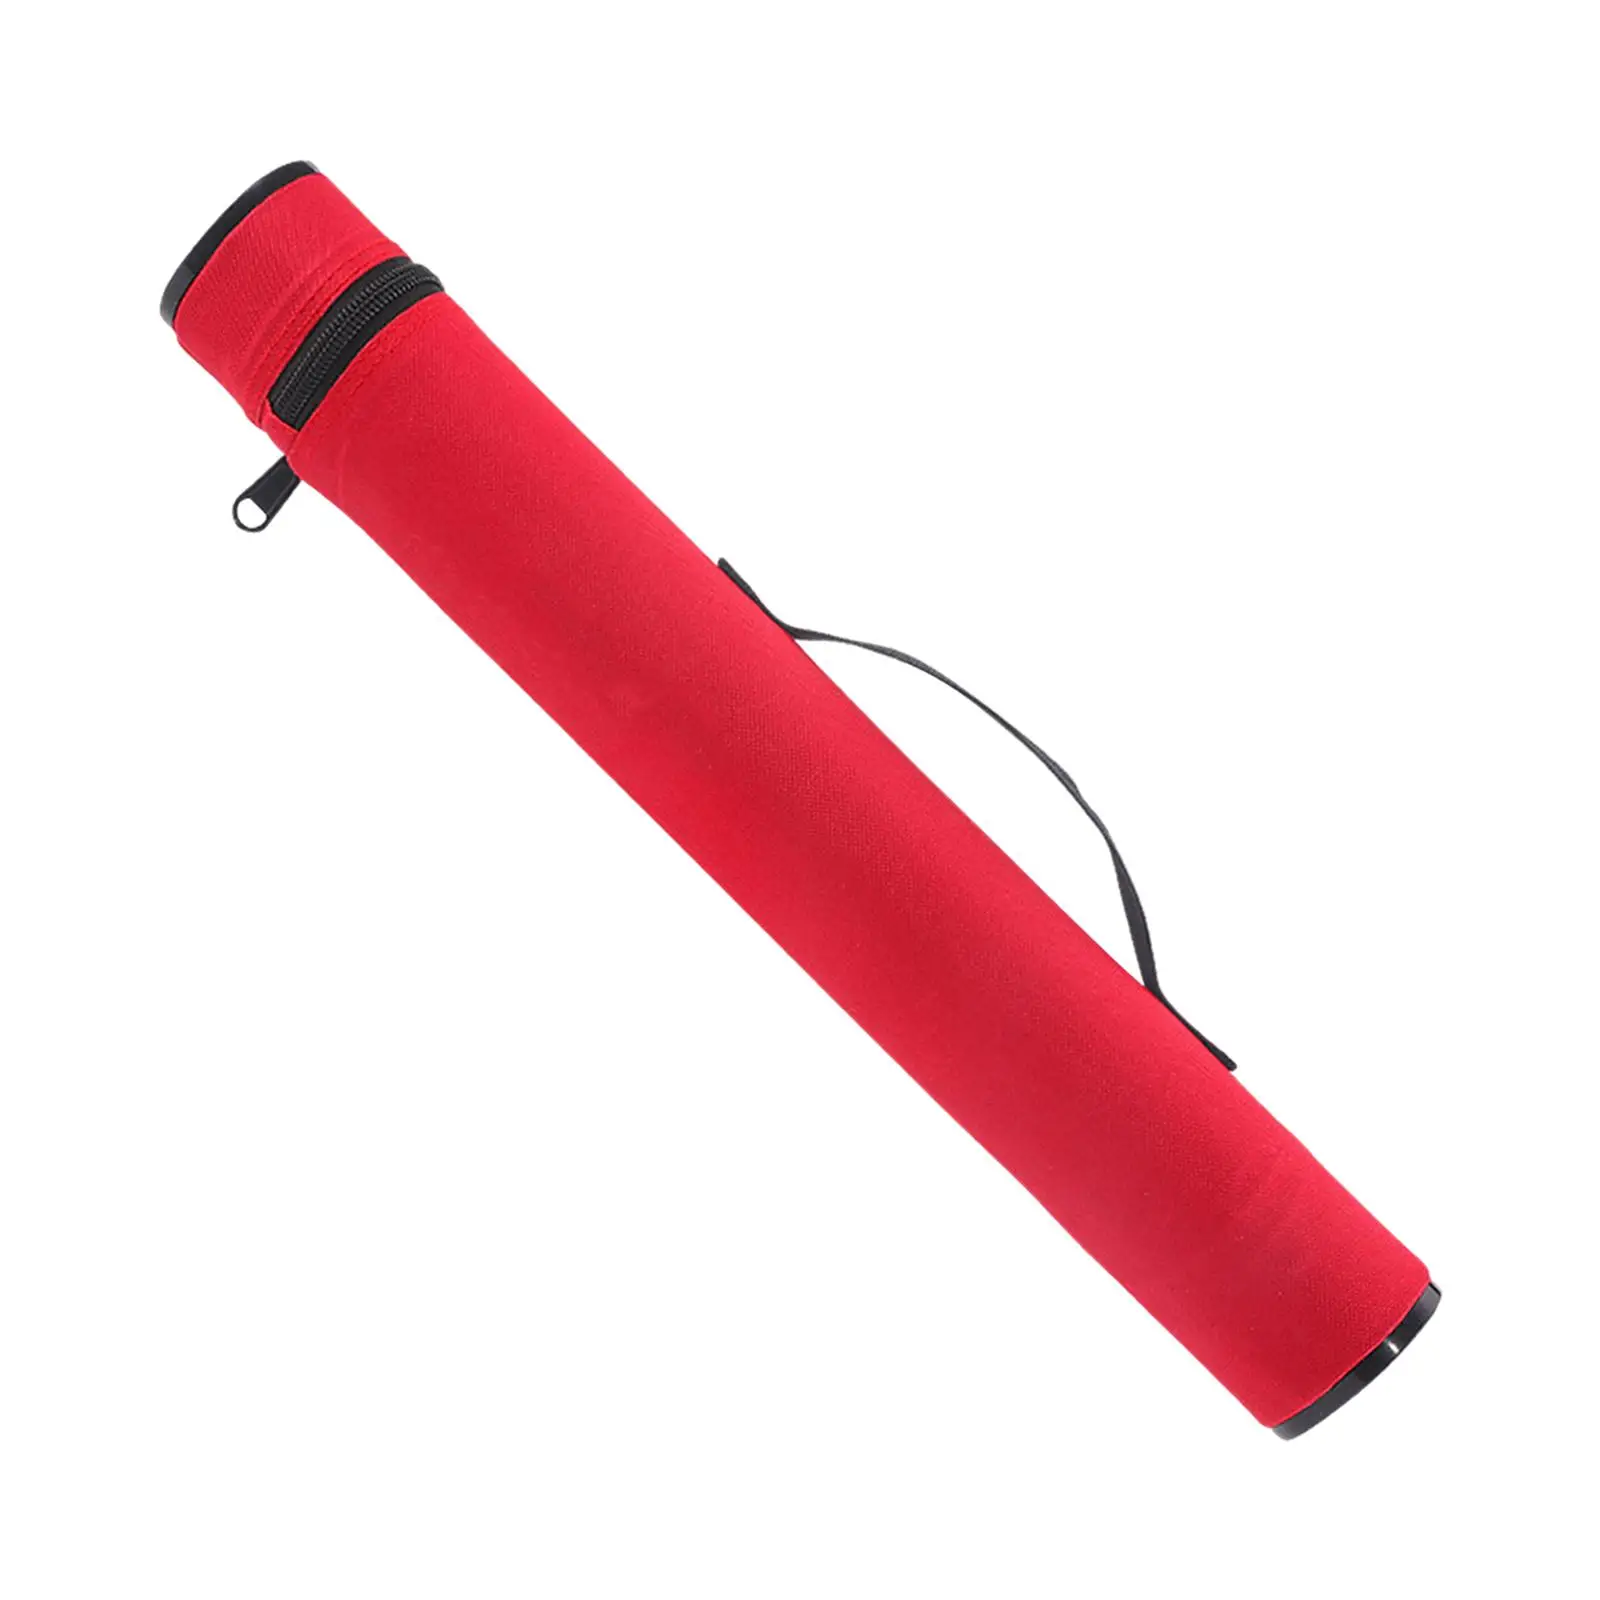 Fly Fishing Rods Case Waterproof Protective cover Fishing Equipment Fishing Rod Organizer Fishing Rod Tube Case Travel Case